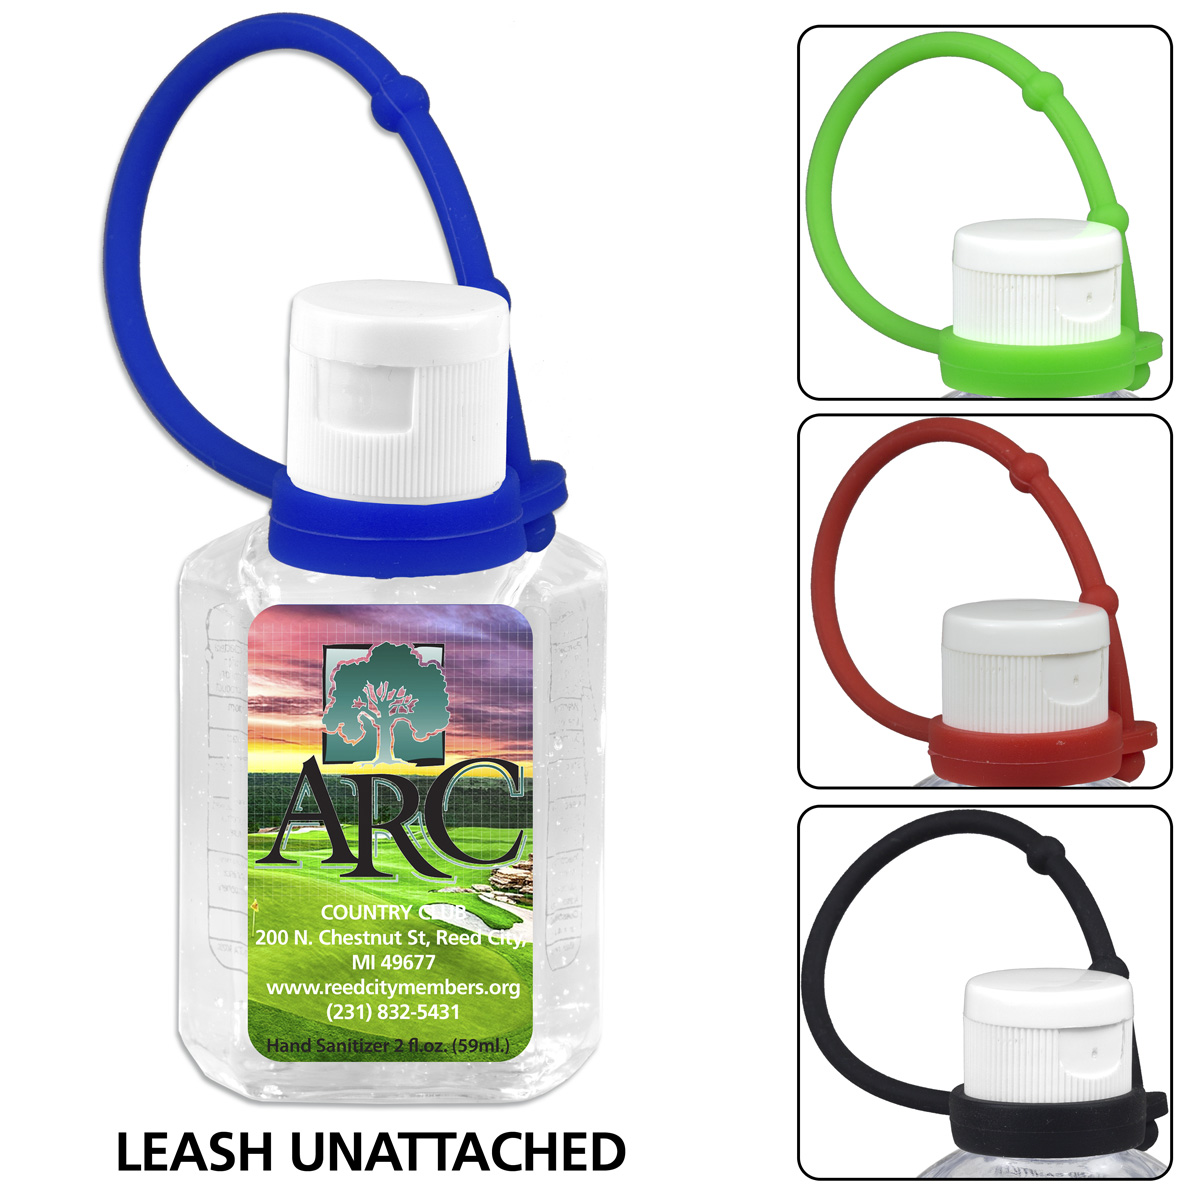 "BLAST" 1.0 oz Compact Hand Sanitizer Antibacterial Gel in Flip-Top Squeeze Bottle with Adjustable Silicone Carry Strap